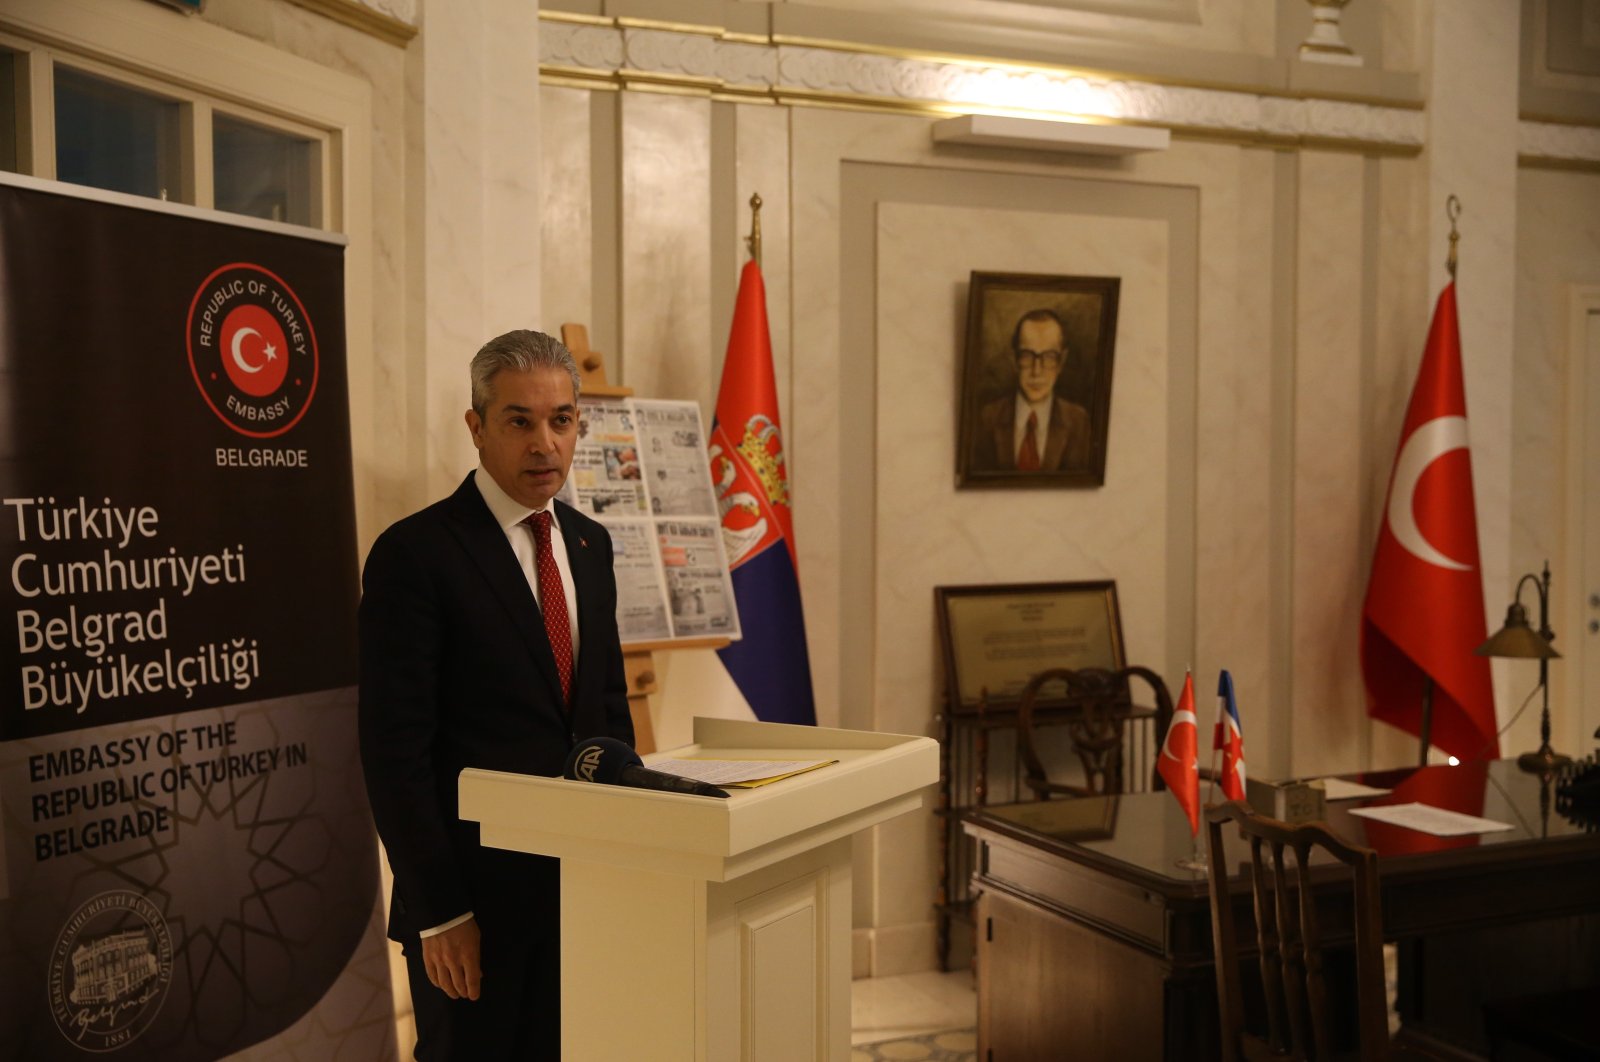 Turkish Ambassador in Belgrade Hami Aksoy gives a speech during the commemoration ceremony in Belgrade, Serbia, March 9, 2022. (AA Photo)